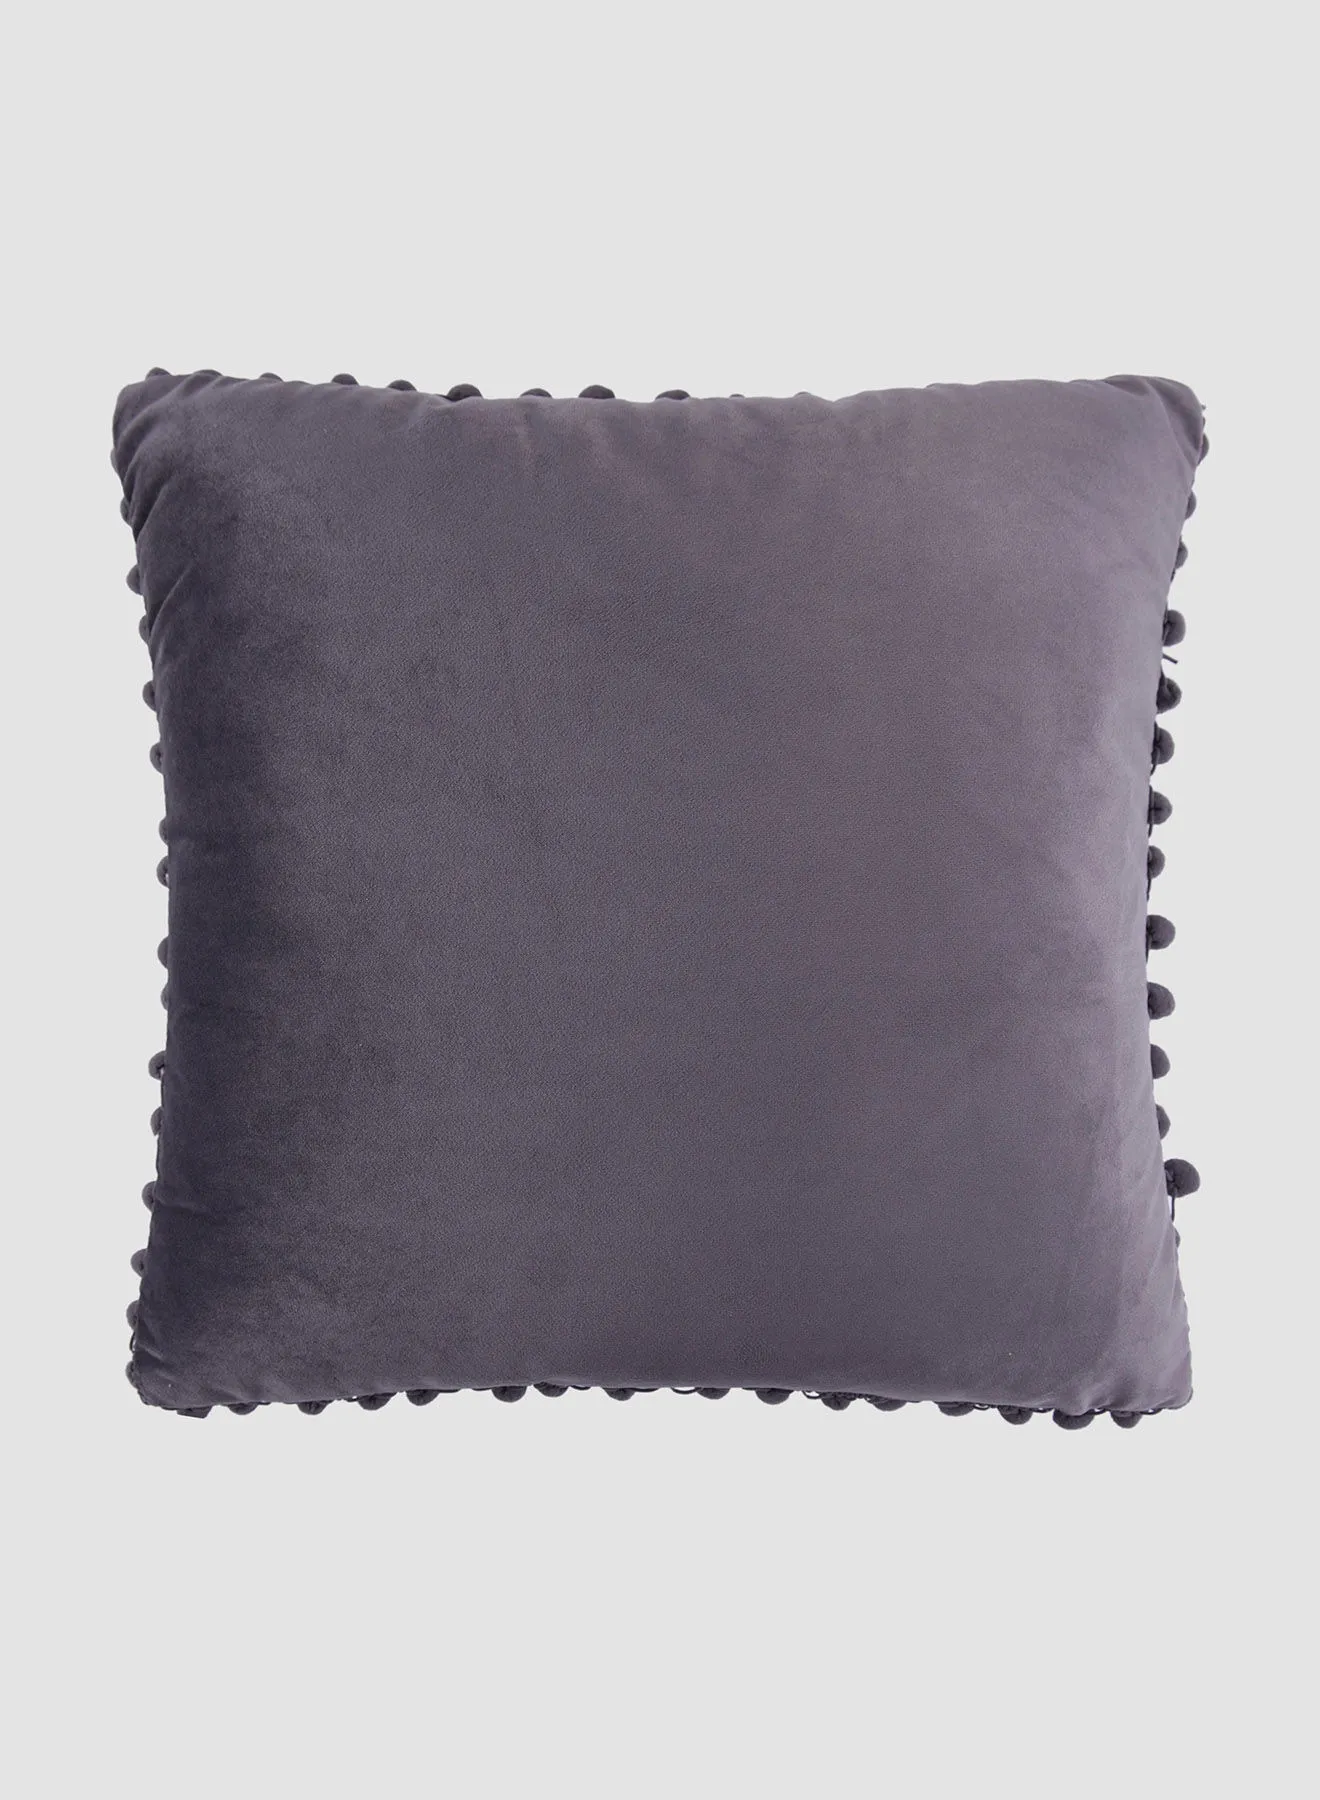 Switch Velvet Cushion  with Pom-poms, Unique Luxury Quality Decor Items for the Perfect Stylish Home Grey 45 x 45cm